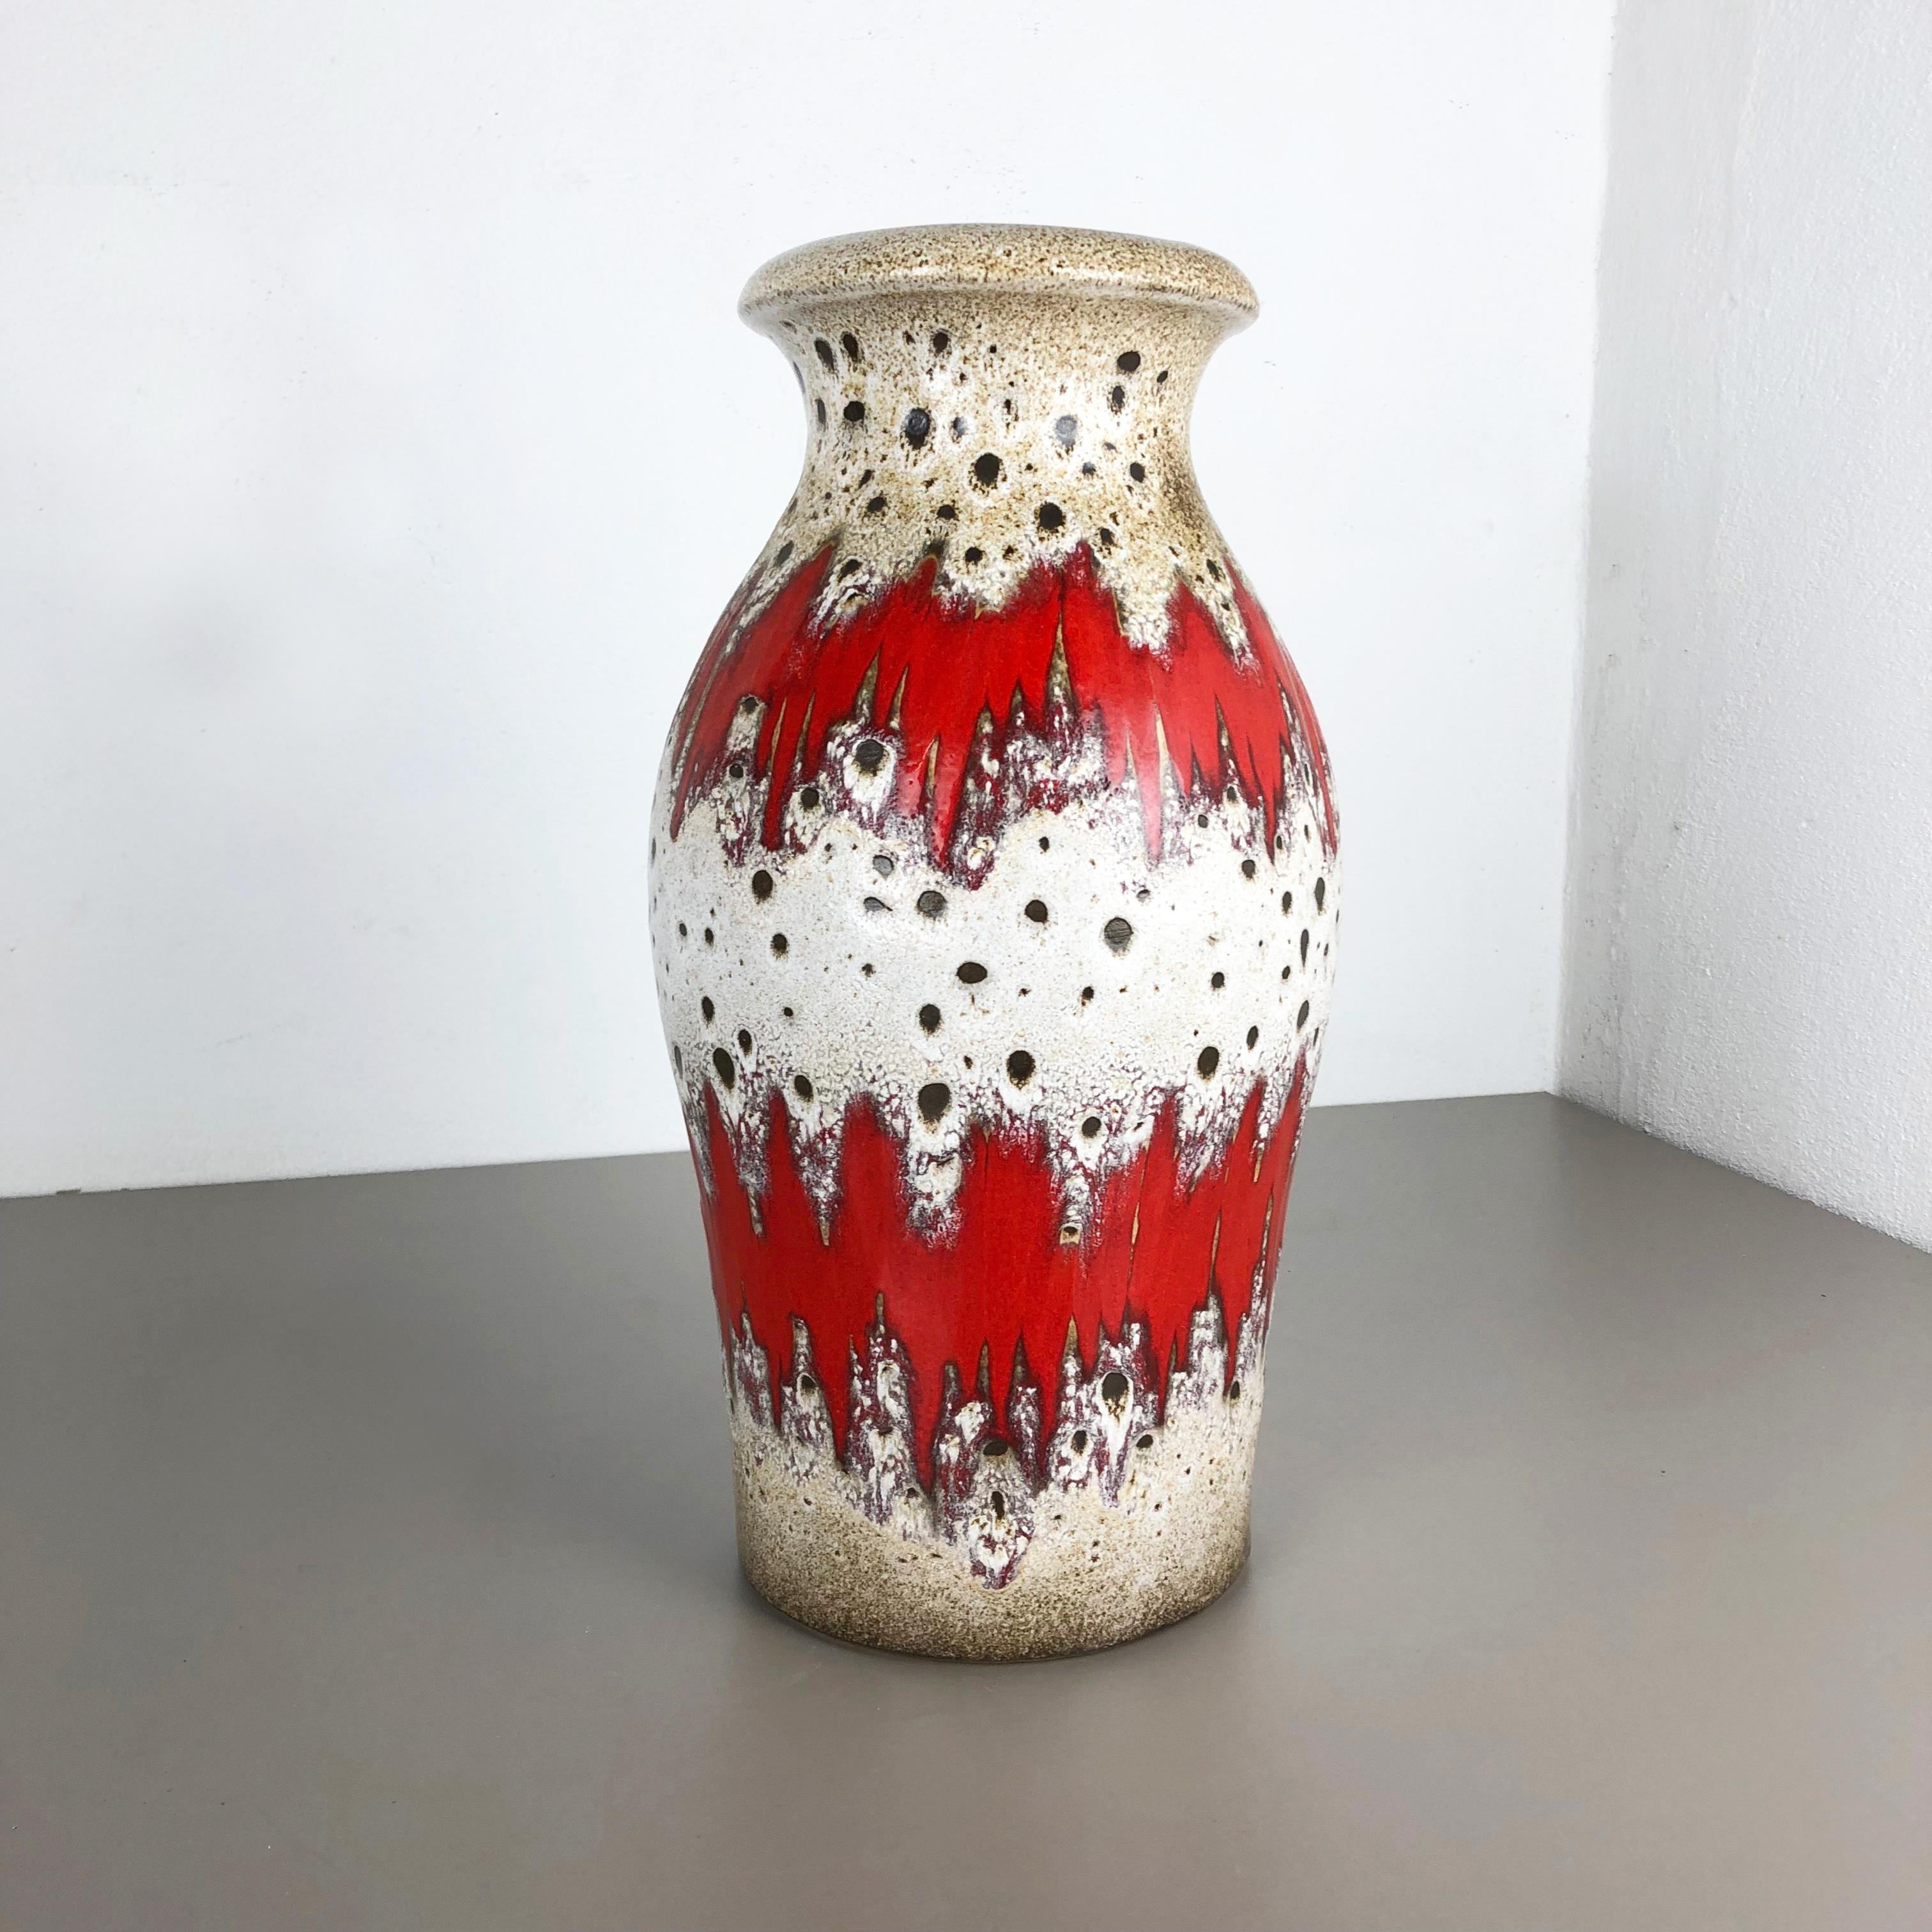 Article:

Fat lava art vase extra large version


Model: 290-40


Producer:

Scheurich, Germany



Decade:

1970s


Description:

This original vintage vase was produced in the 1970s in Germany. It is made of ceramic pottery in